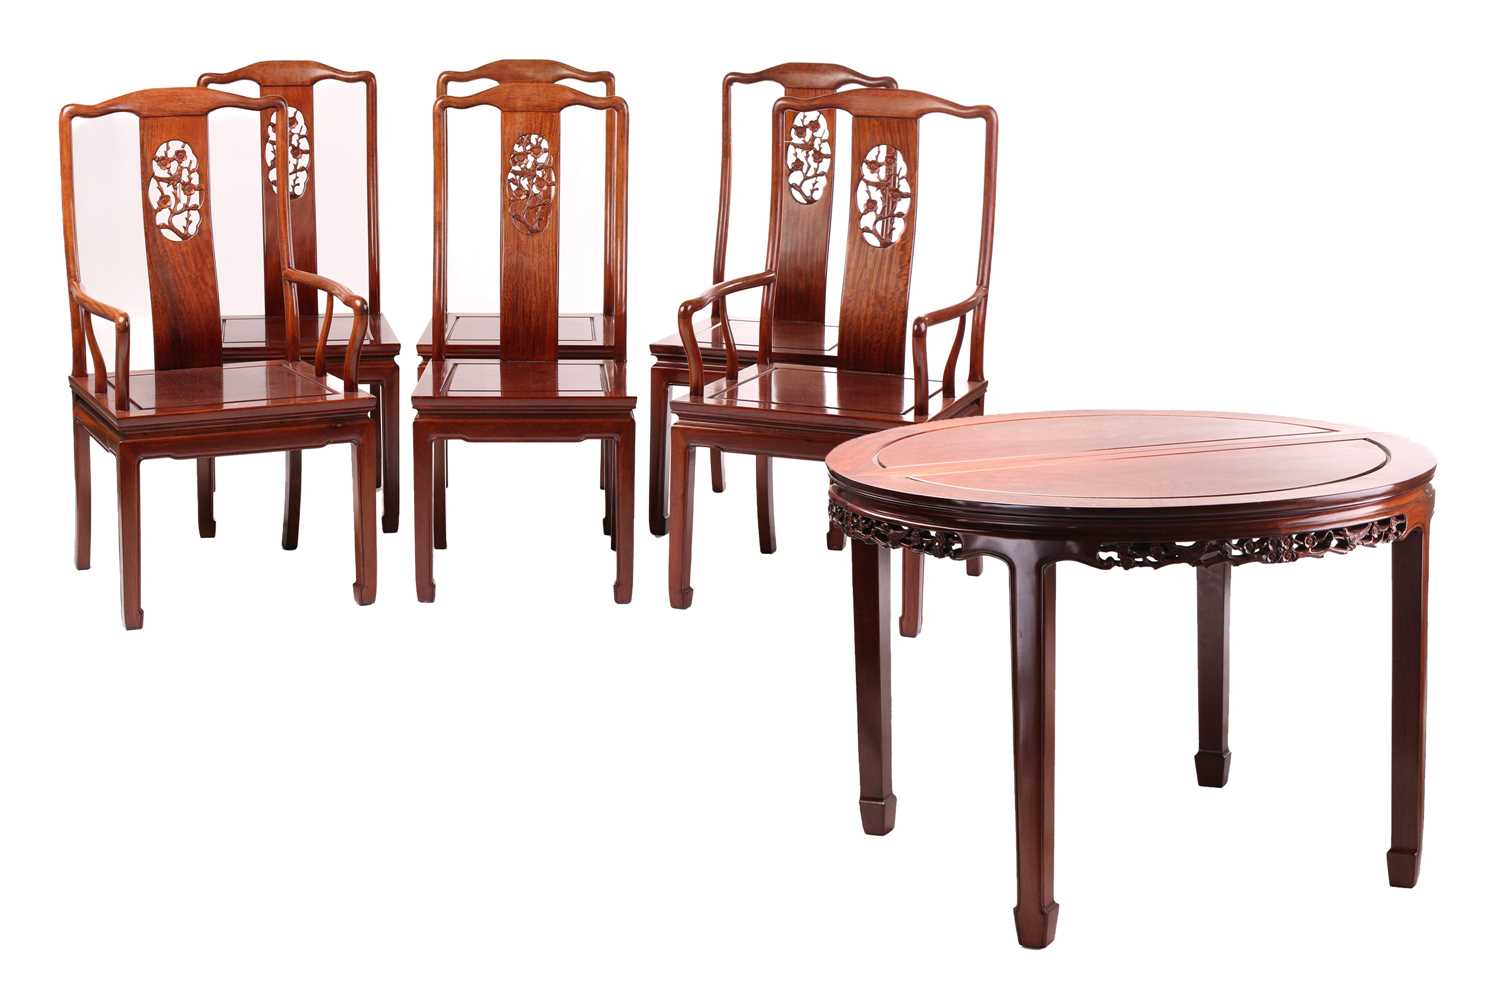 A 20th-century Chinese padouk wood extending circular dining table with single leaf insert and six